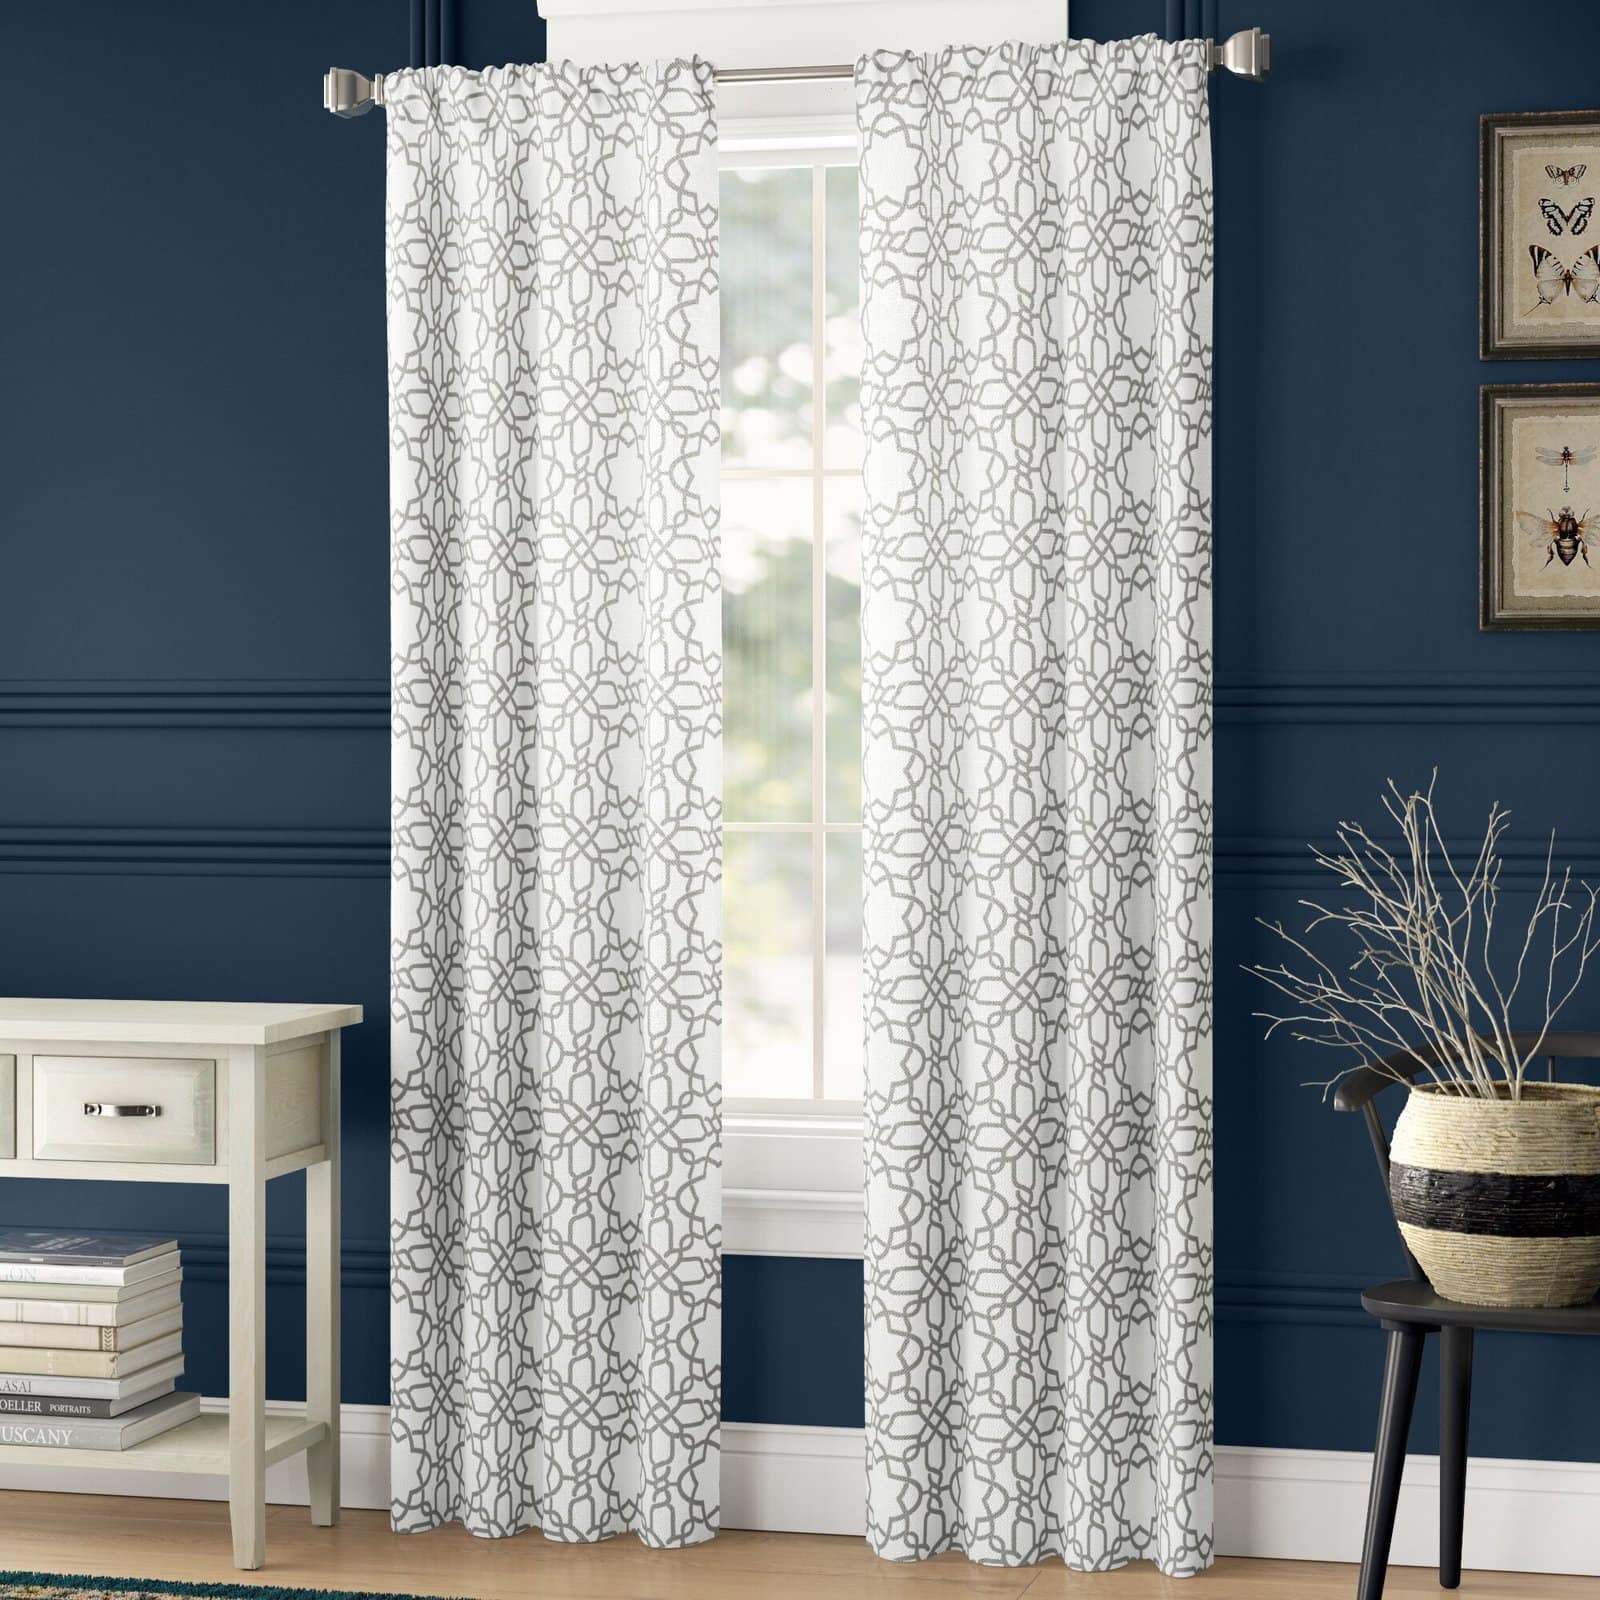 Should Curtains Be Lighter Or Darker Than Walls?